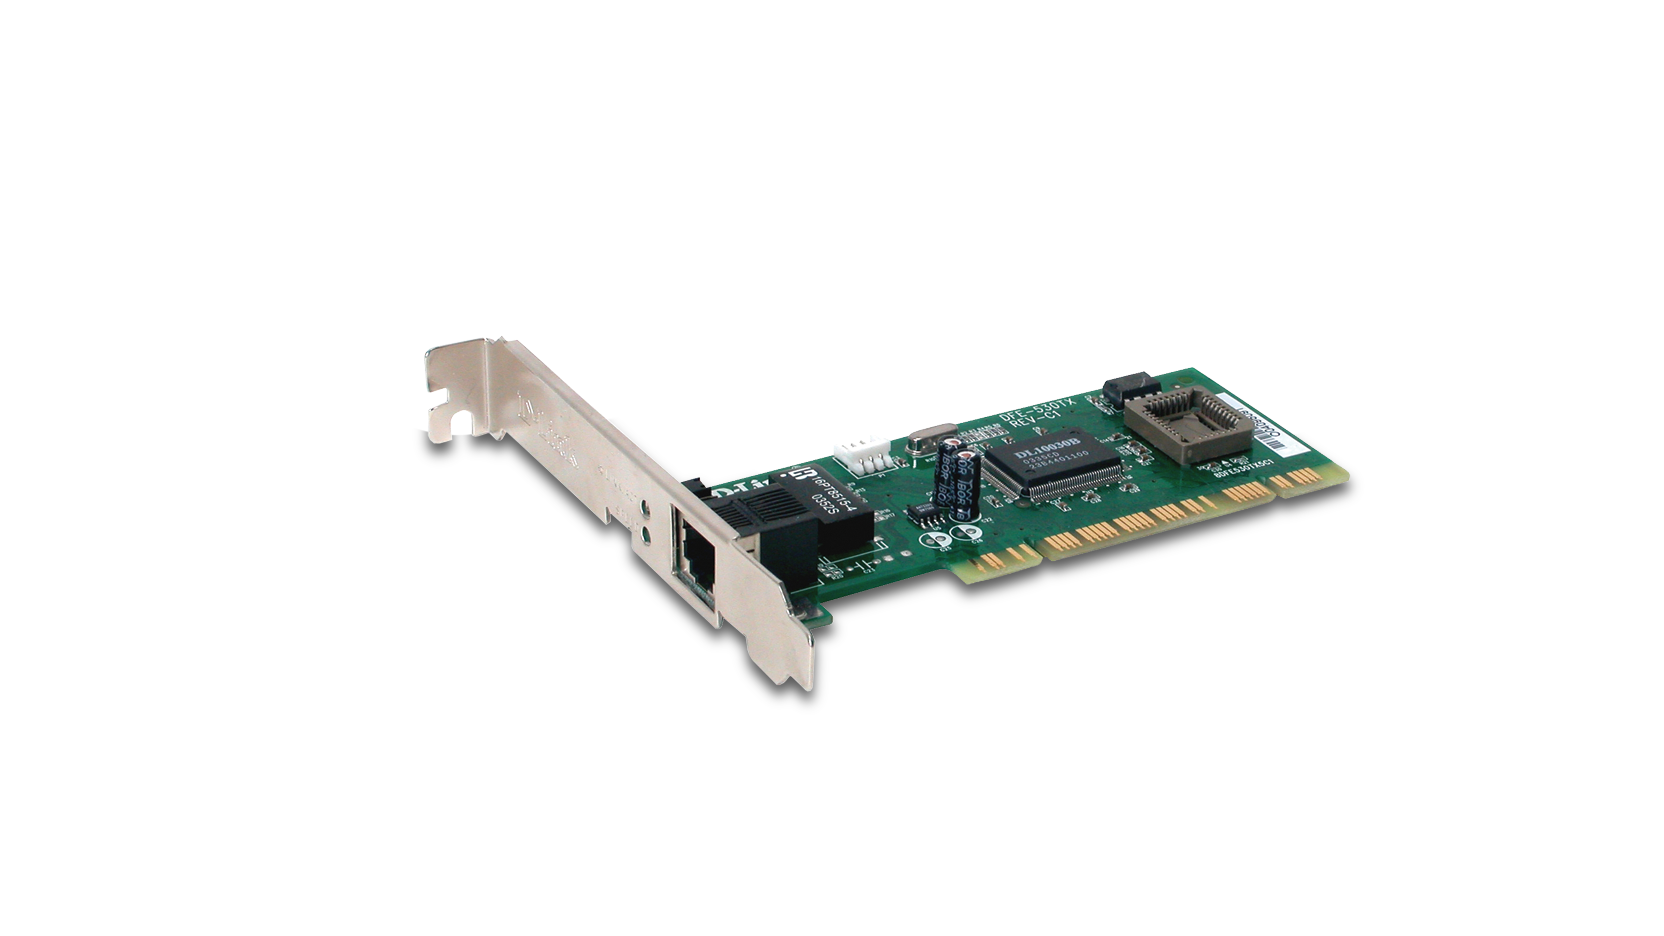 pci ethernet adapter